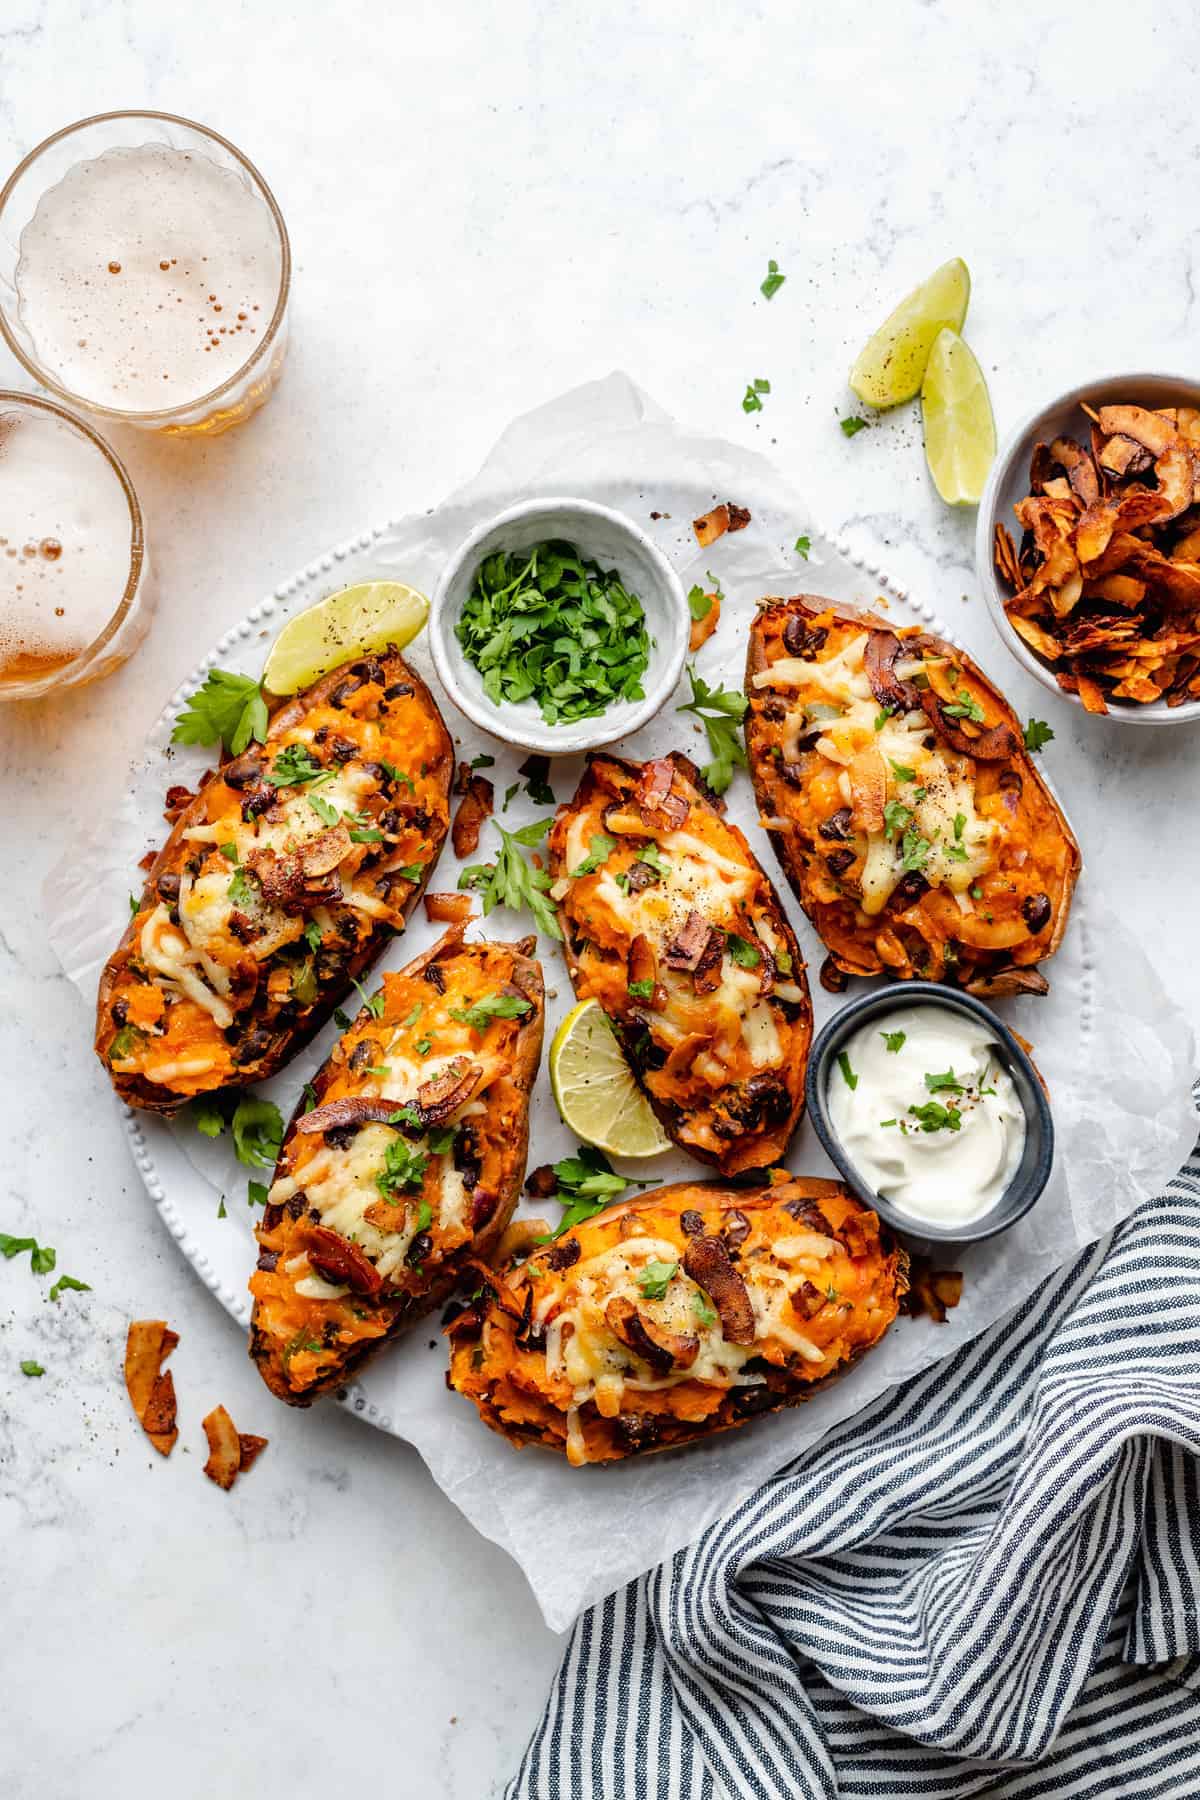 Overhead view of vegan sweet potato skins on plate with garnishes